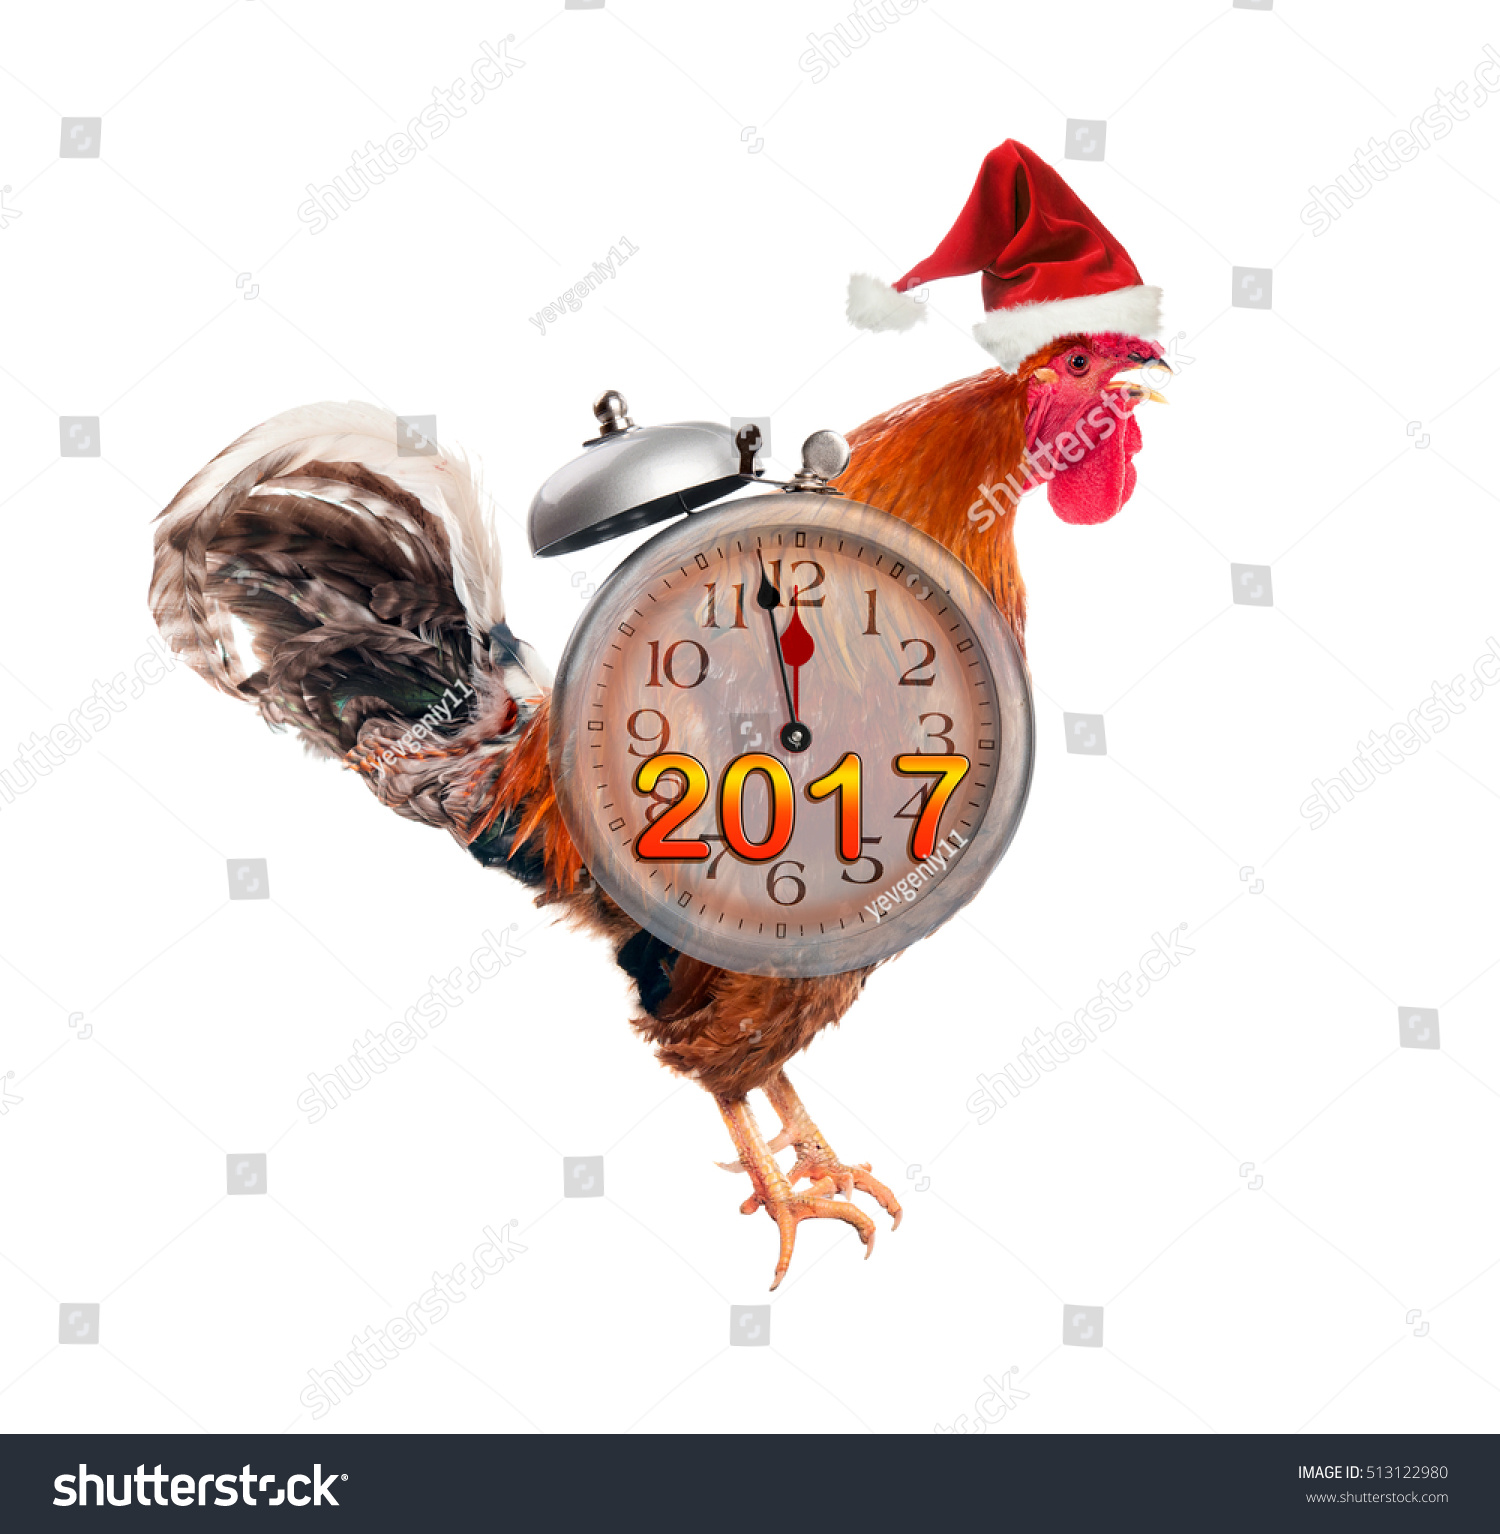 Collage Rooster Alarm Clock Simvol Chinese Stock Photo Edit Now 513122980 Roosting is the action of perching aloft to sleep at night, and is done by both sexes. https www shutterstock com image photo collage rooster alarm clock simvol chinese 513122980